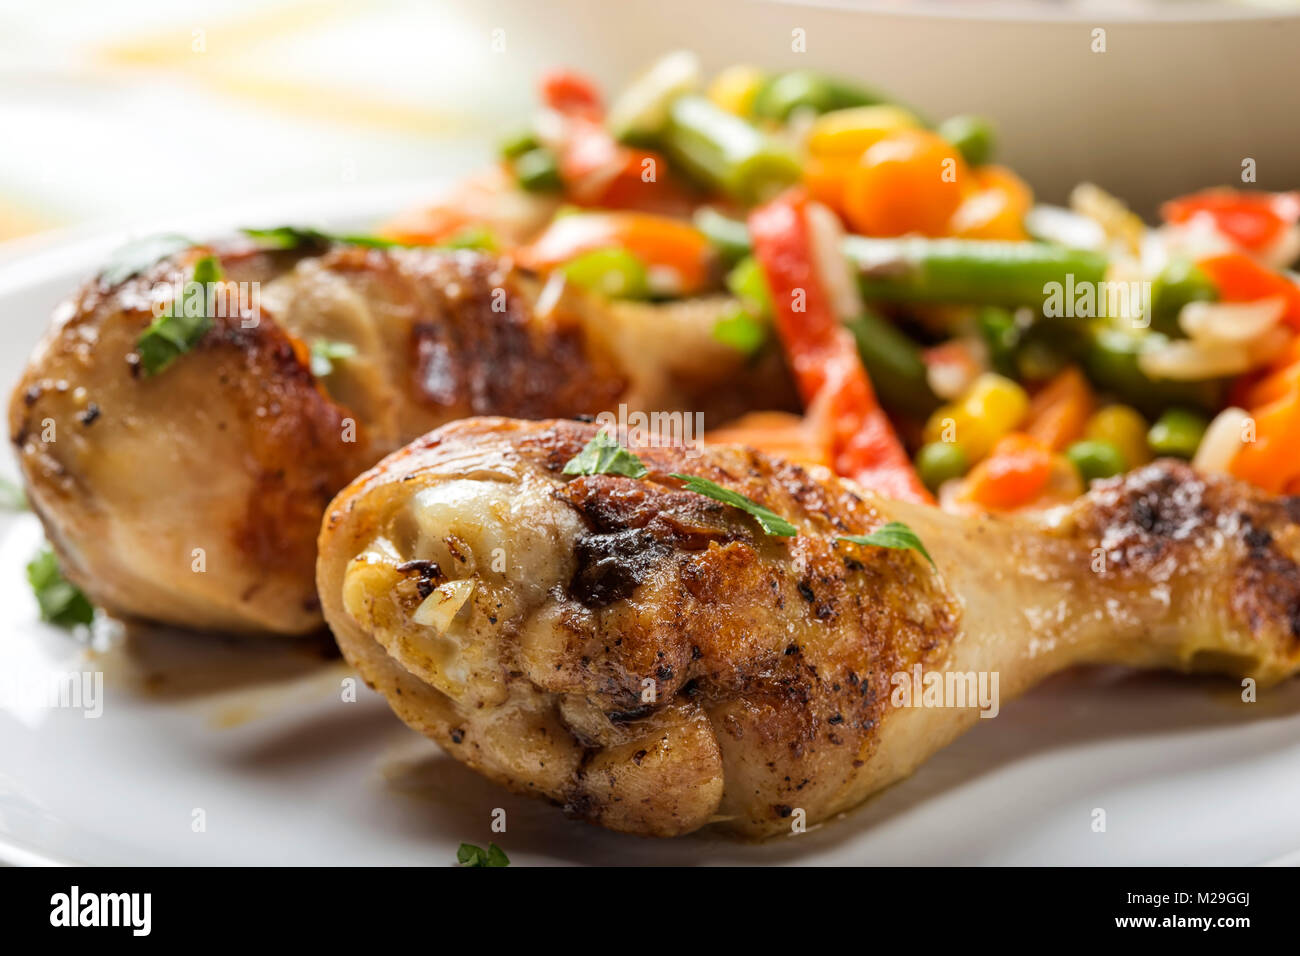 Two grilled chicken drumsticks on palte with vegetables Stock Photo